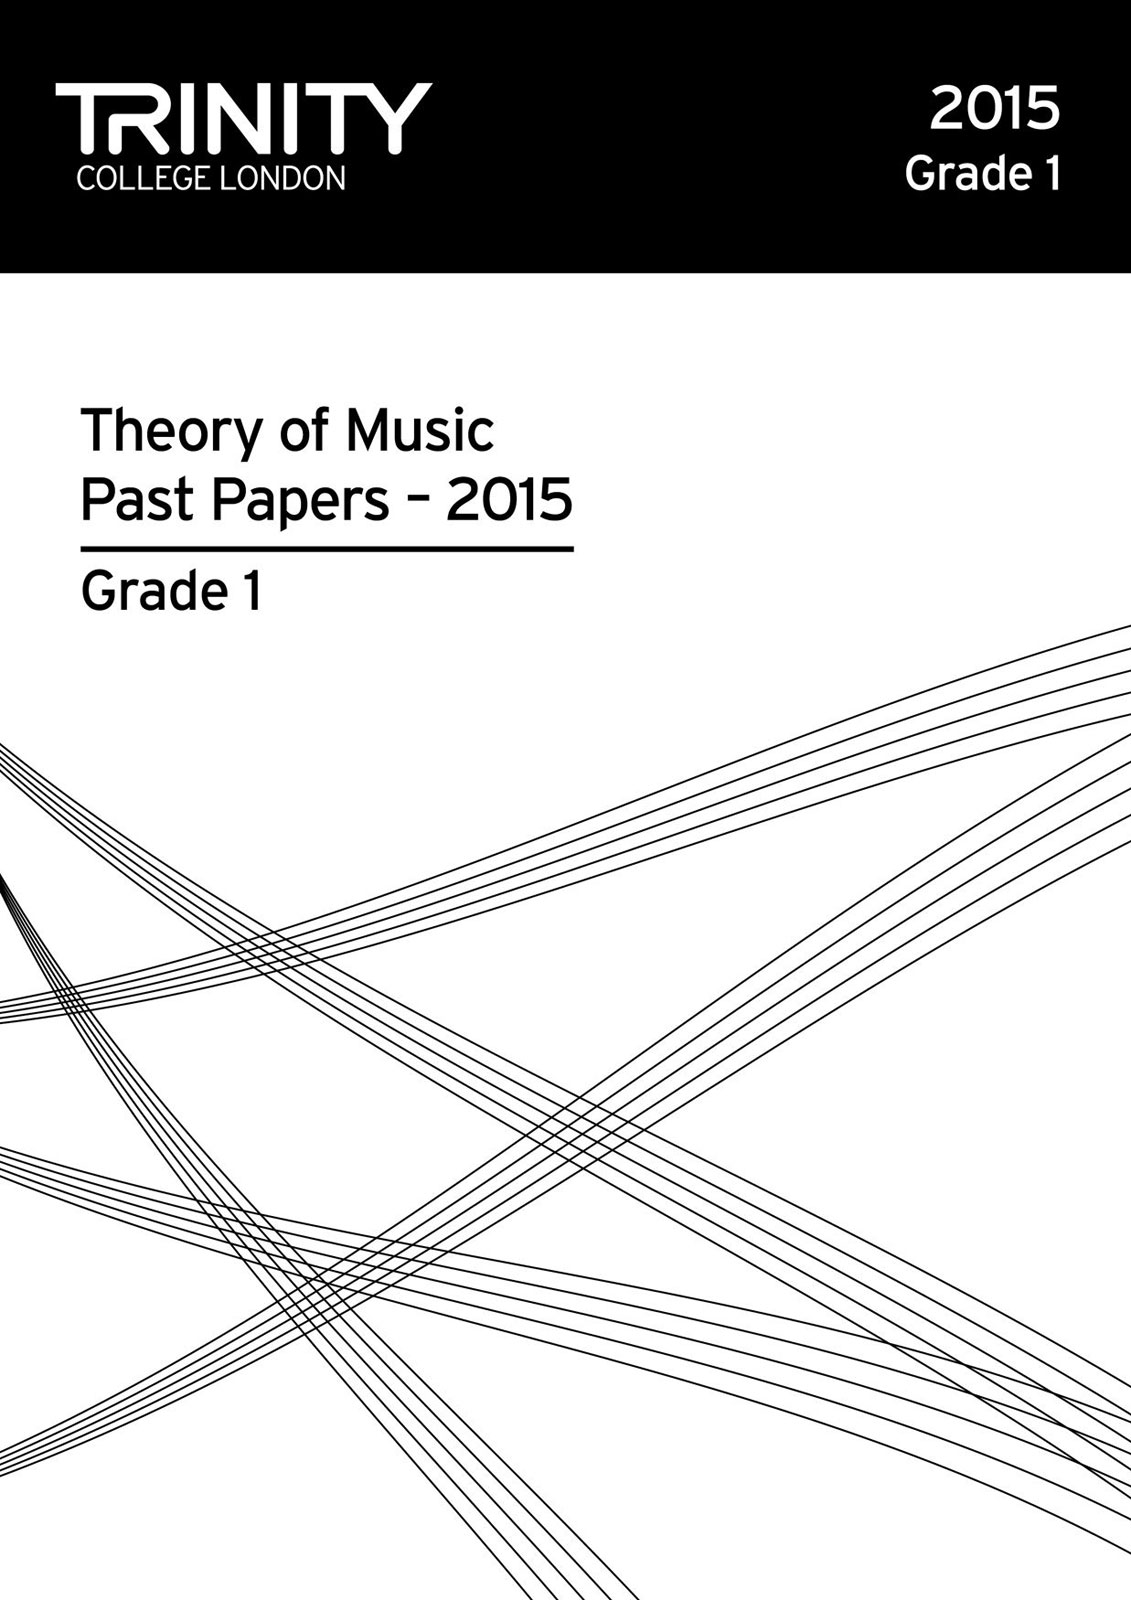 TRINITY GUILDHALL TRINITY COLLEGE LONDON THEORY OF MUSIC PAST PAPER (2015) GRADE 1 (ALL INSTRUMENTS) 